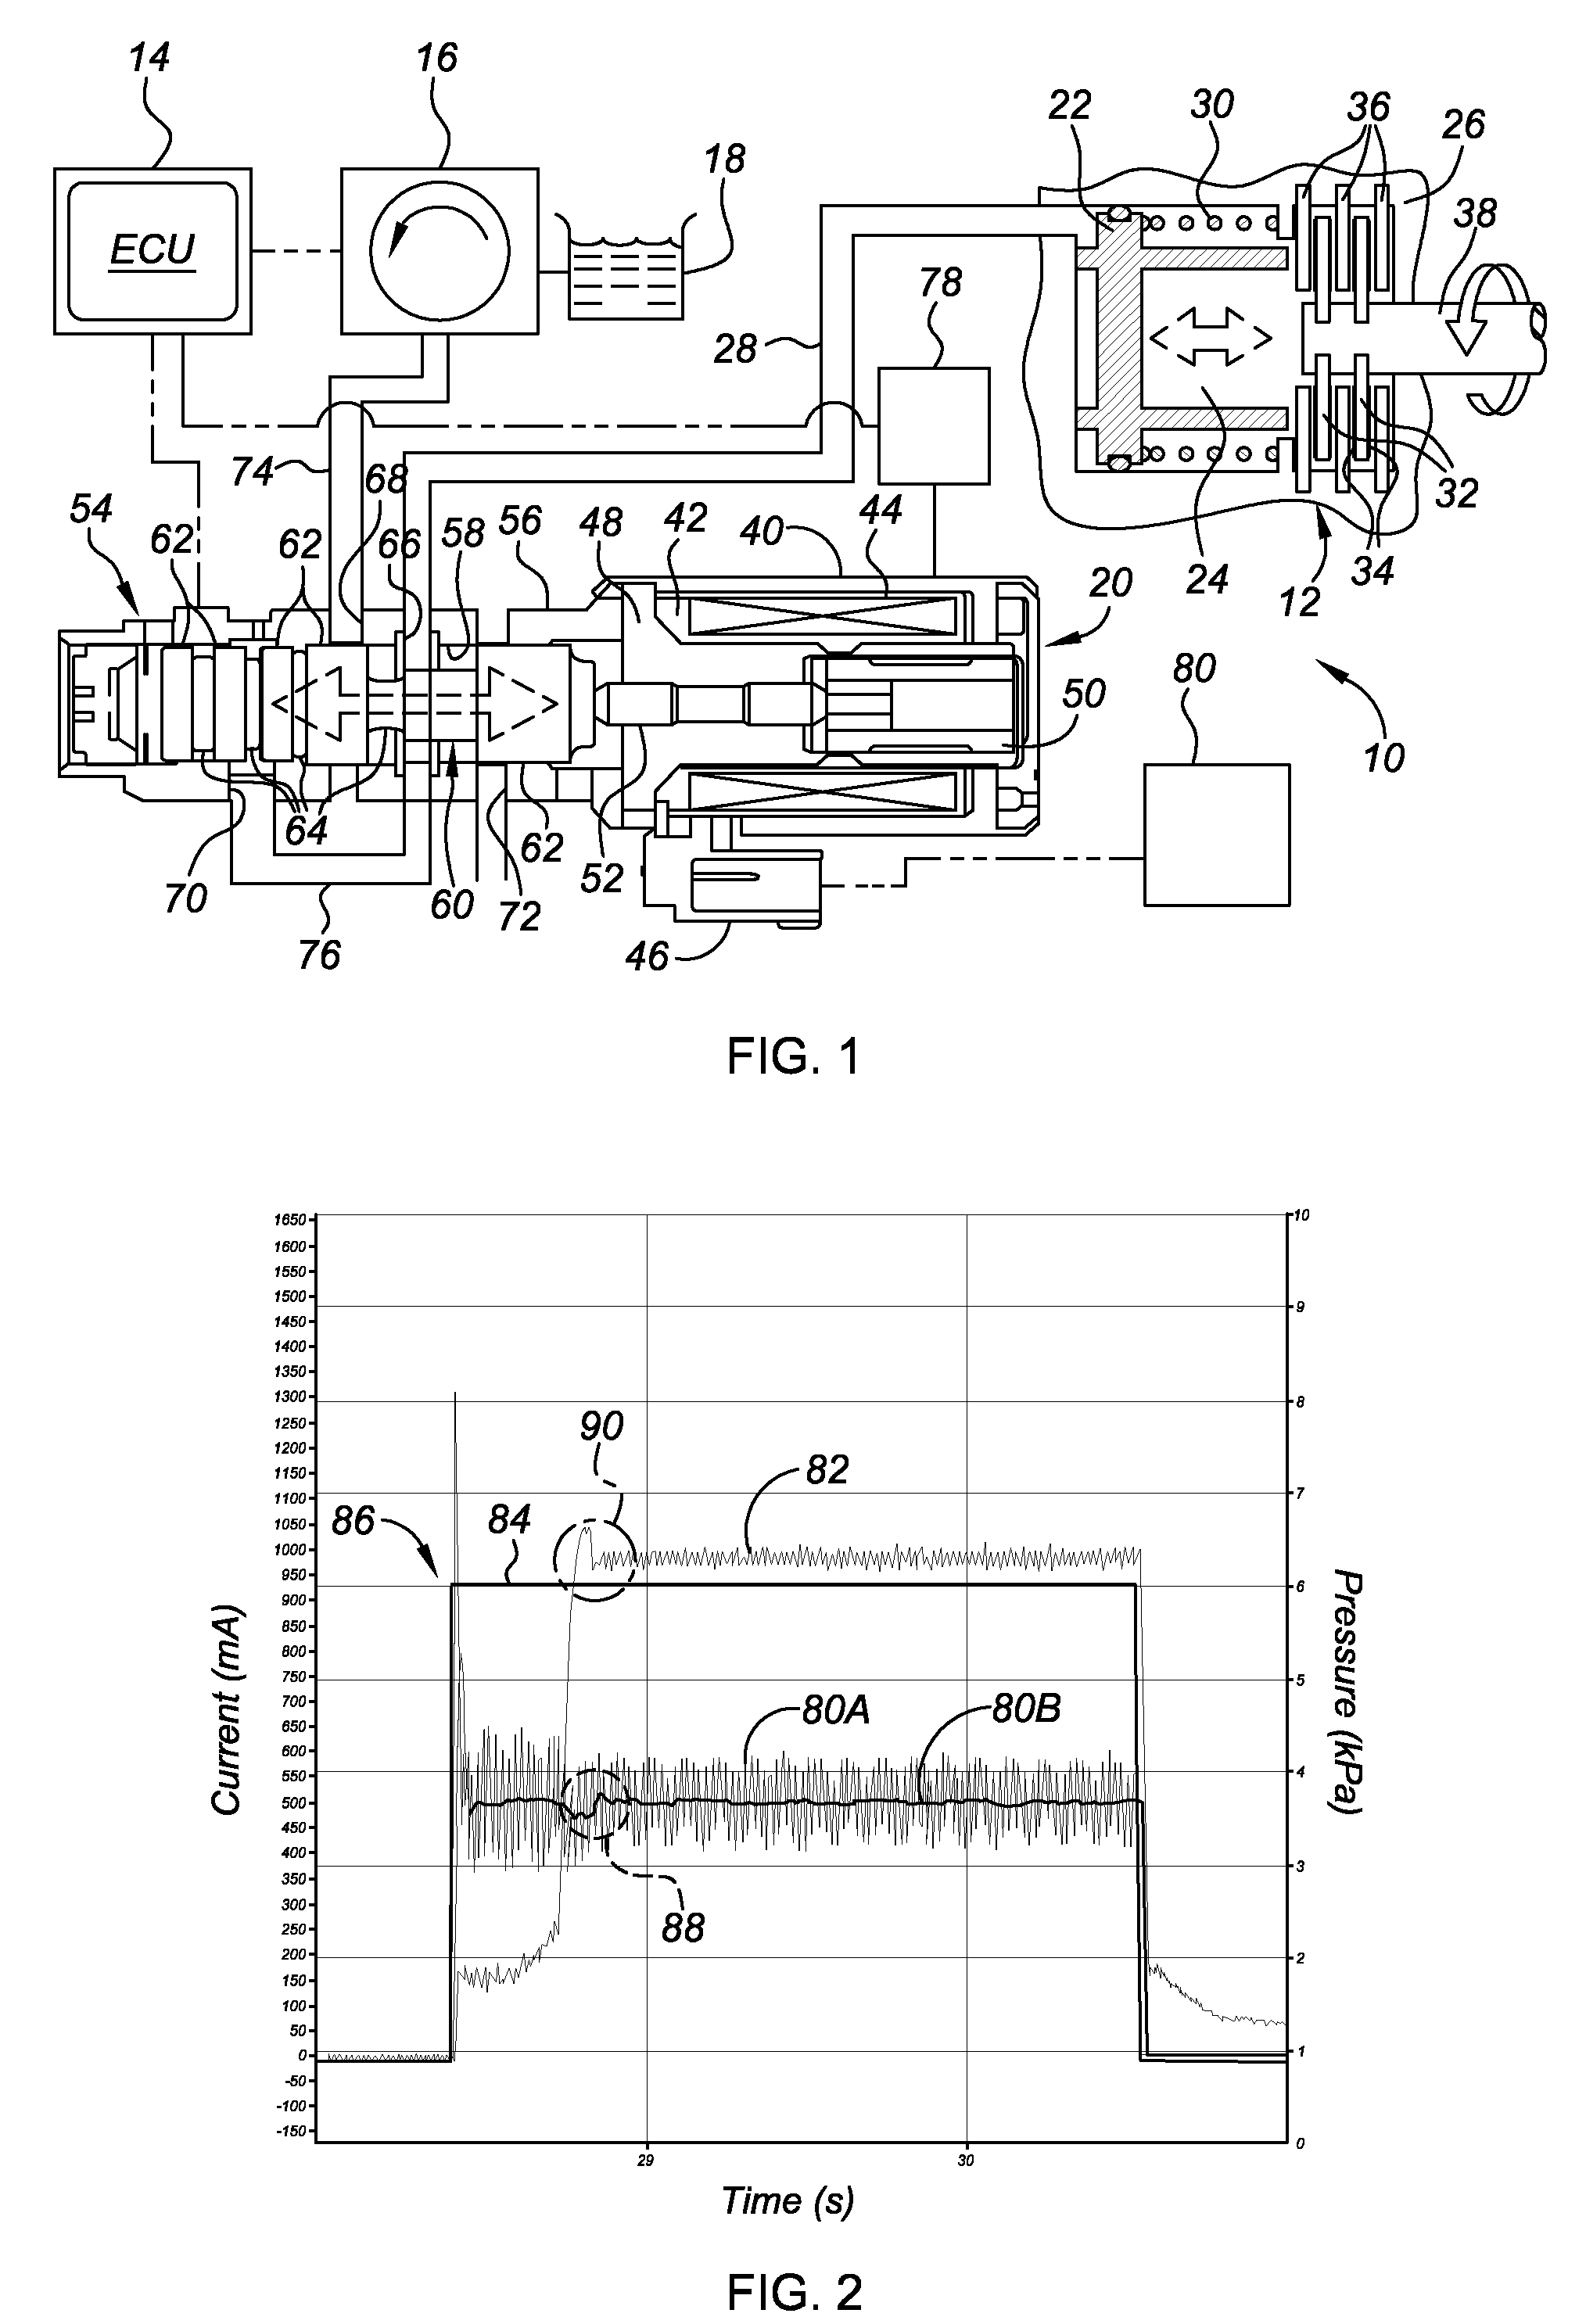 Apparatus and Method for Detecting End-of-Fill at Clutch in Automatic Transmission